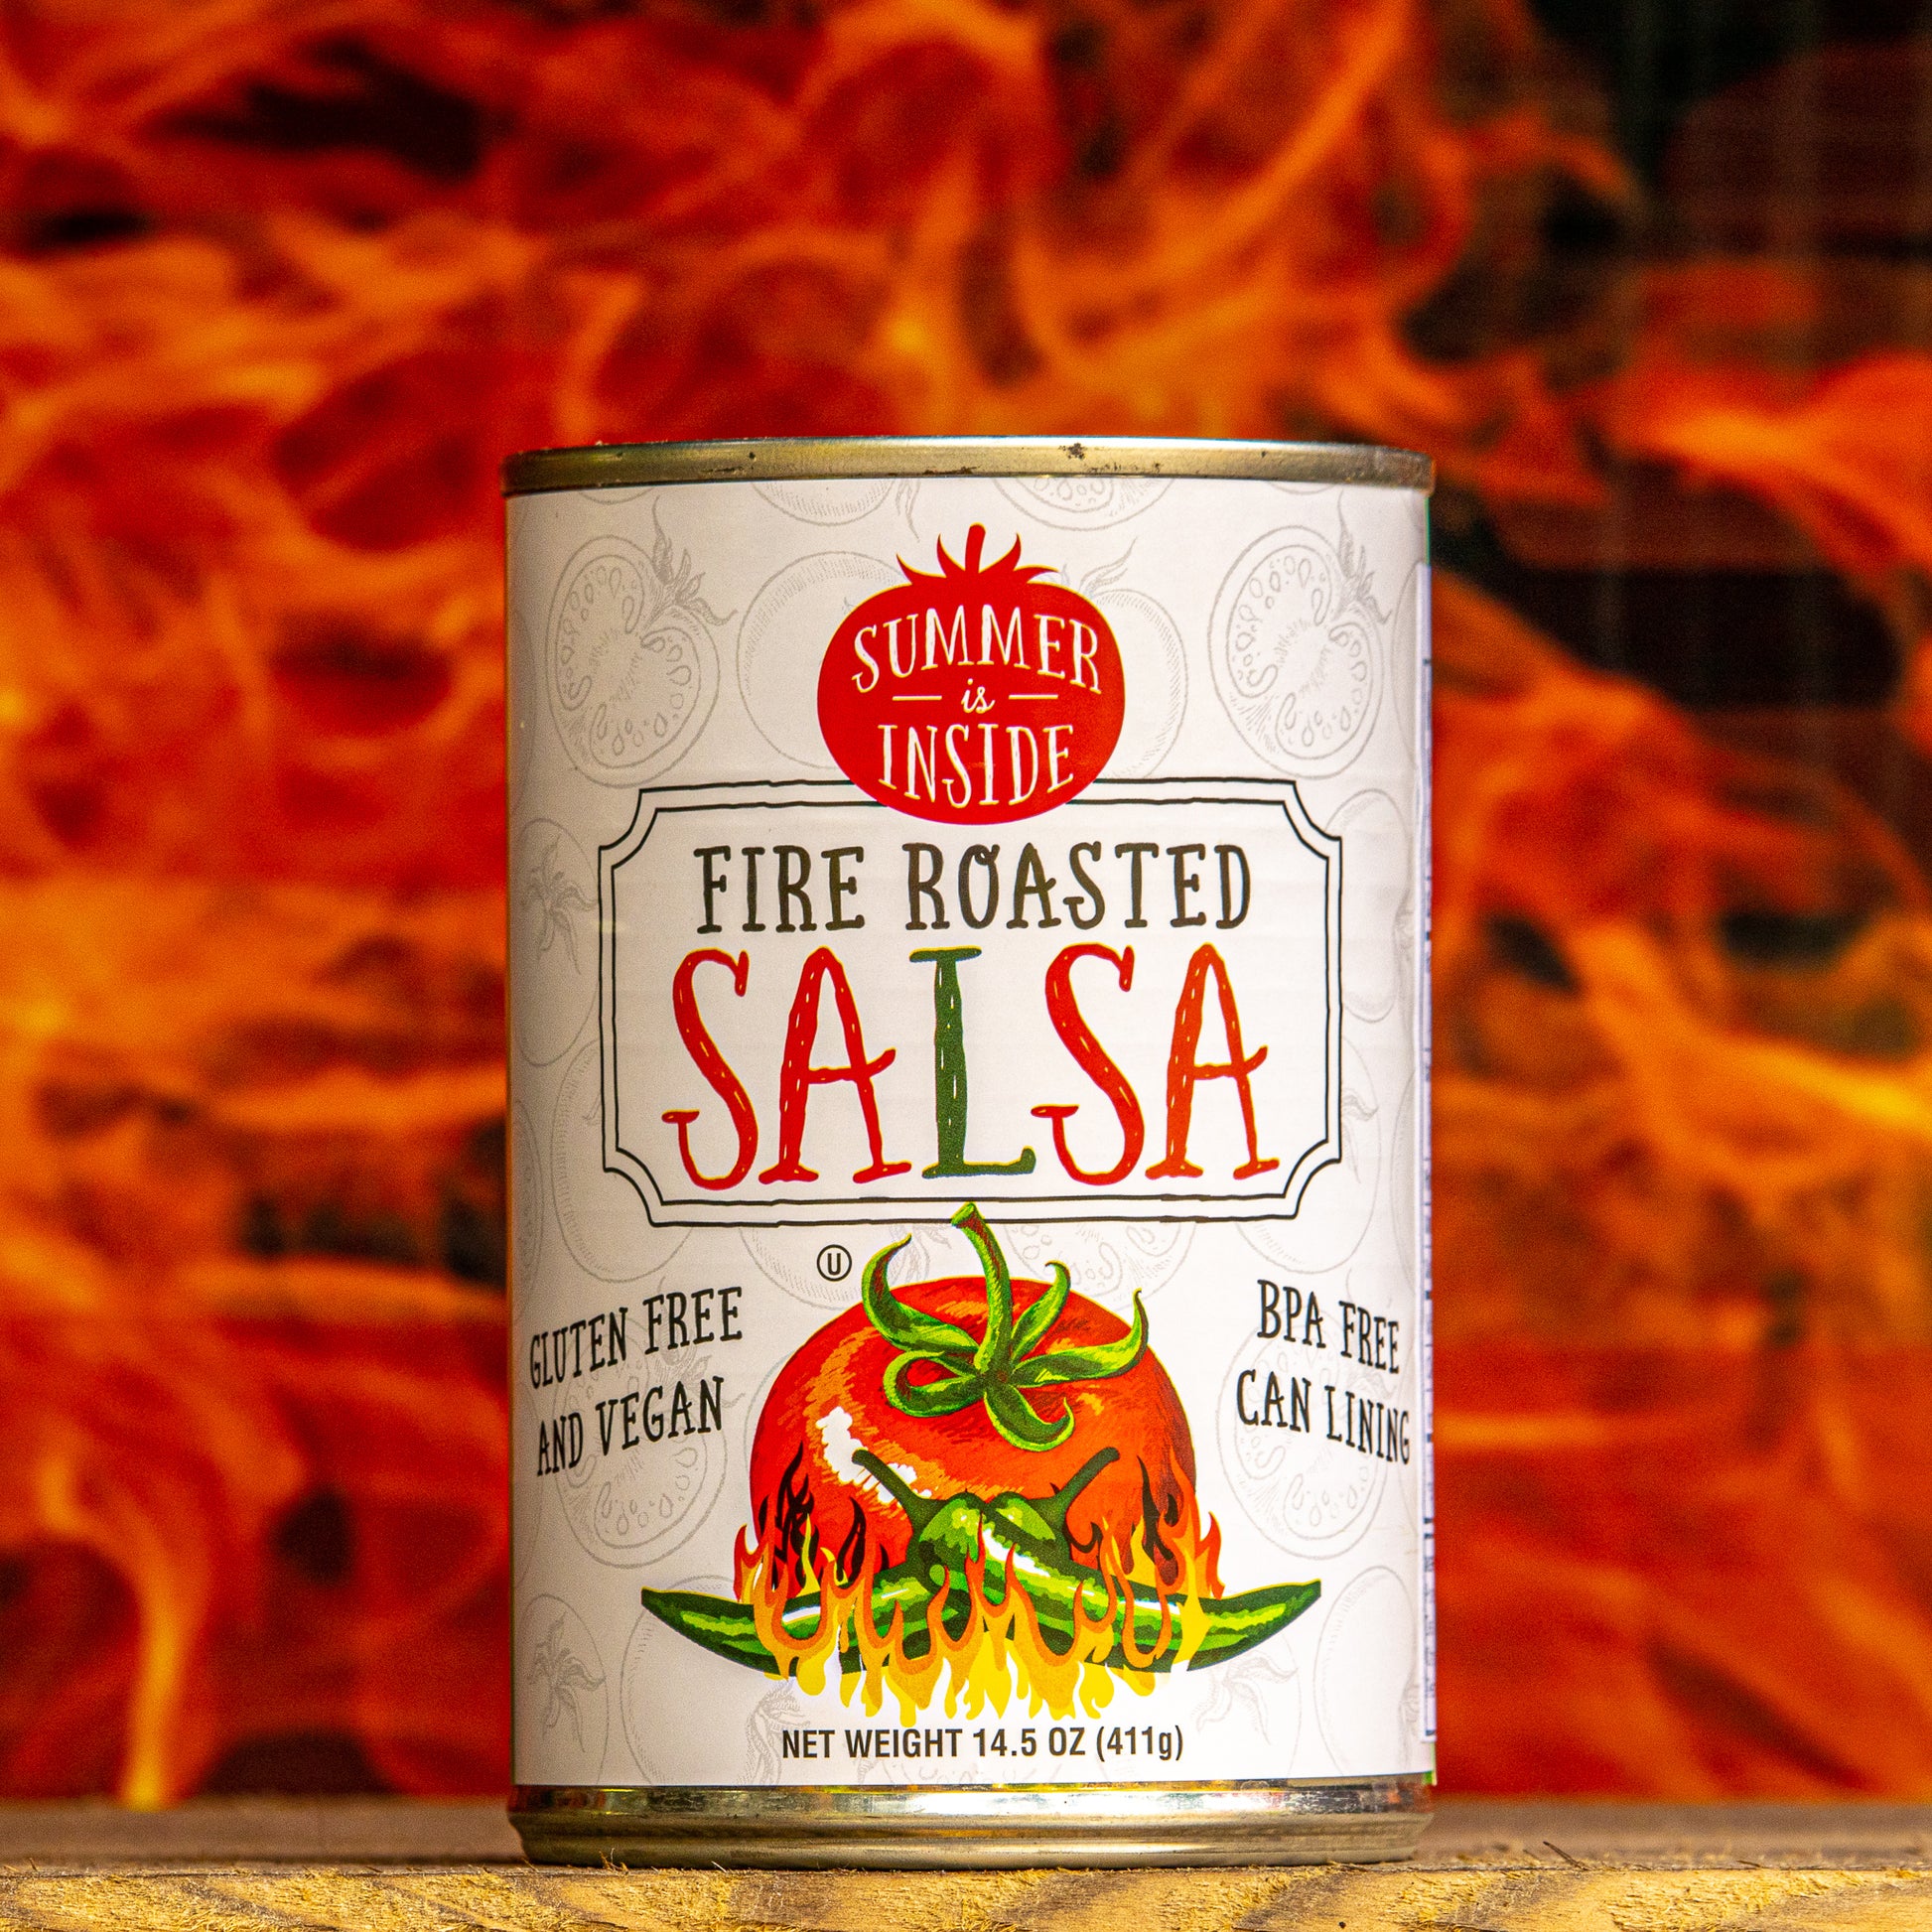 A can of fire roasted salsa in front of painting of flames